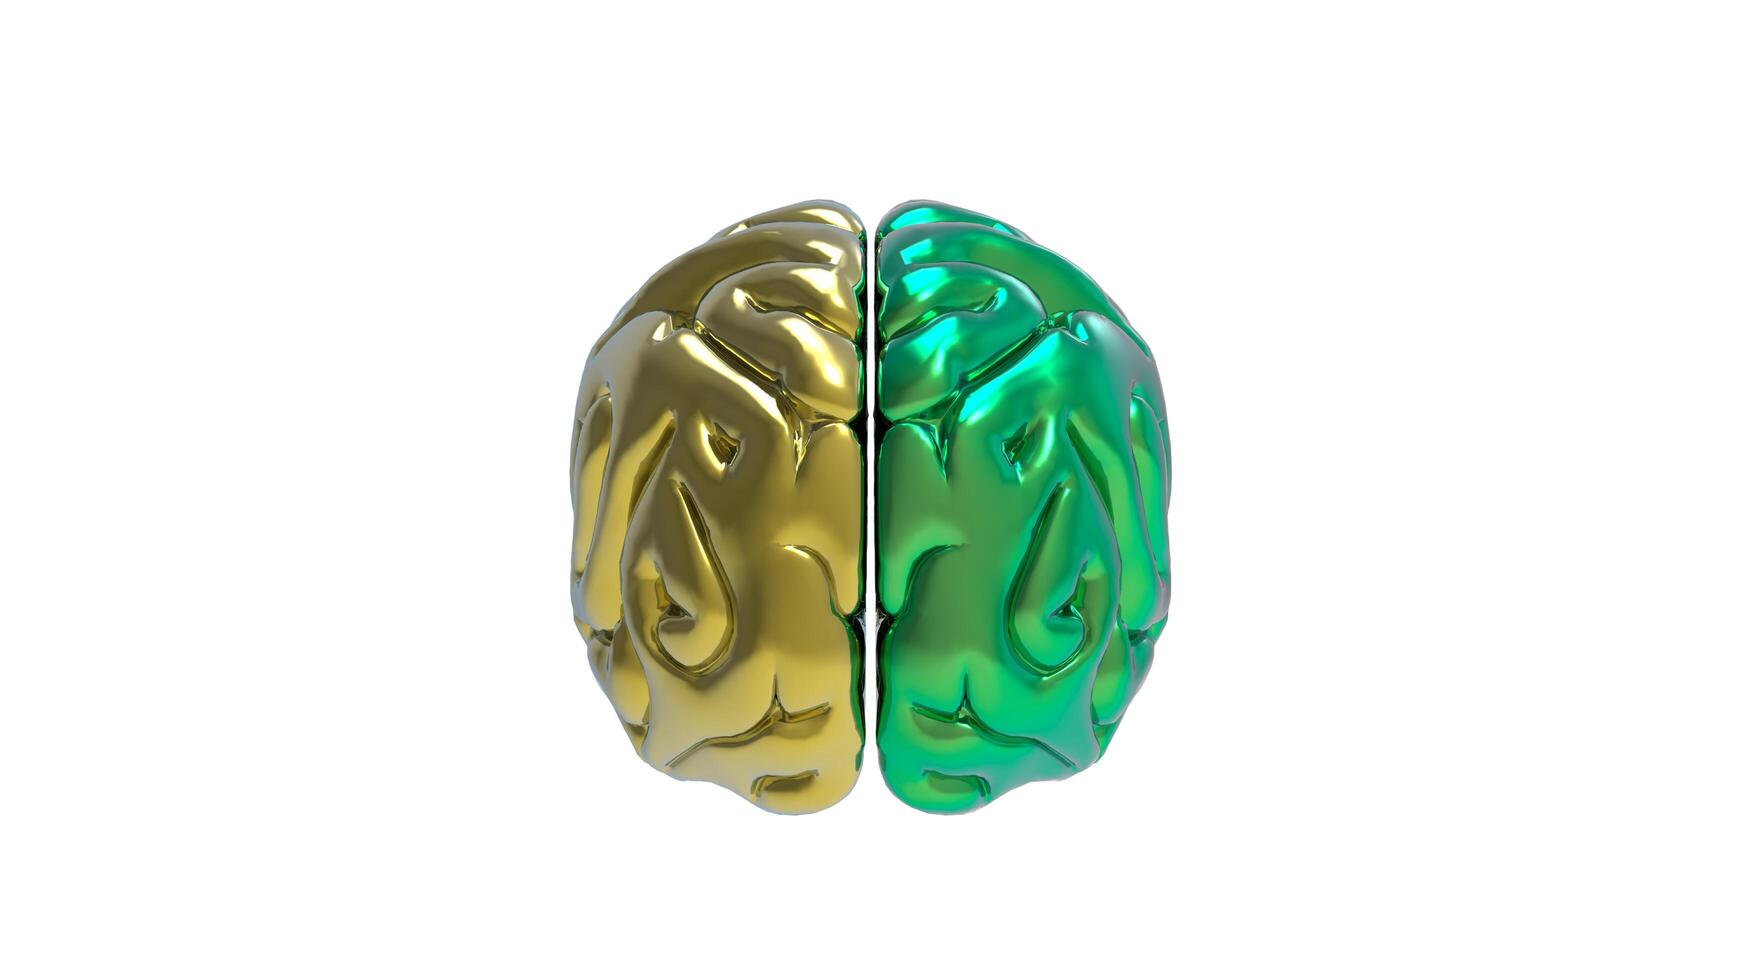 3d Brain object on white background photo